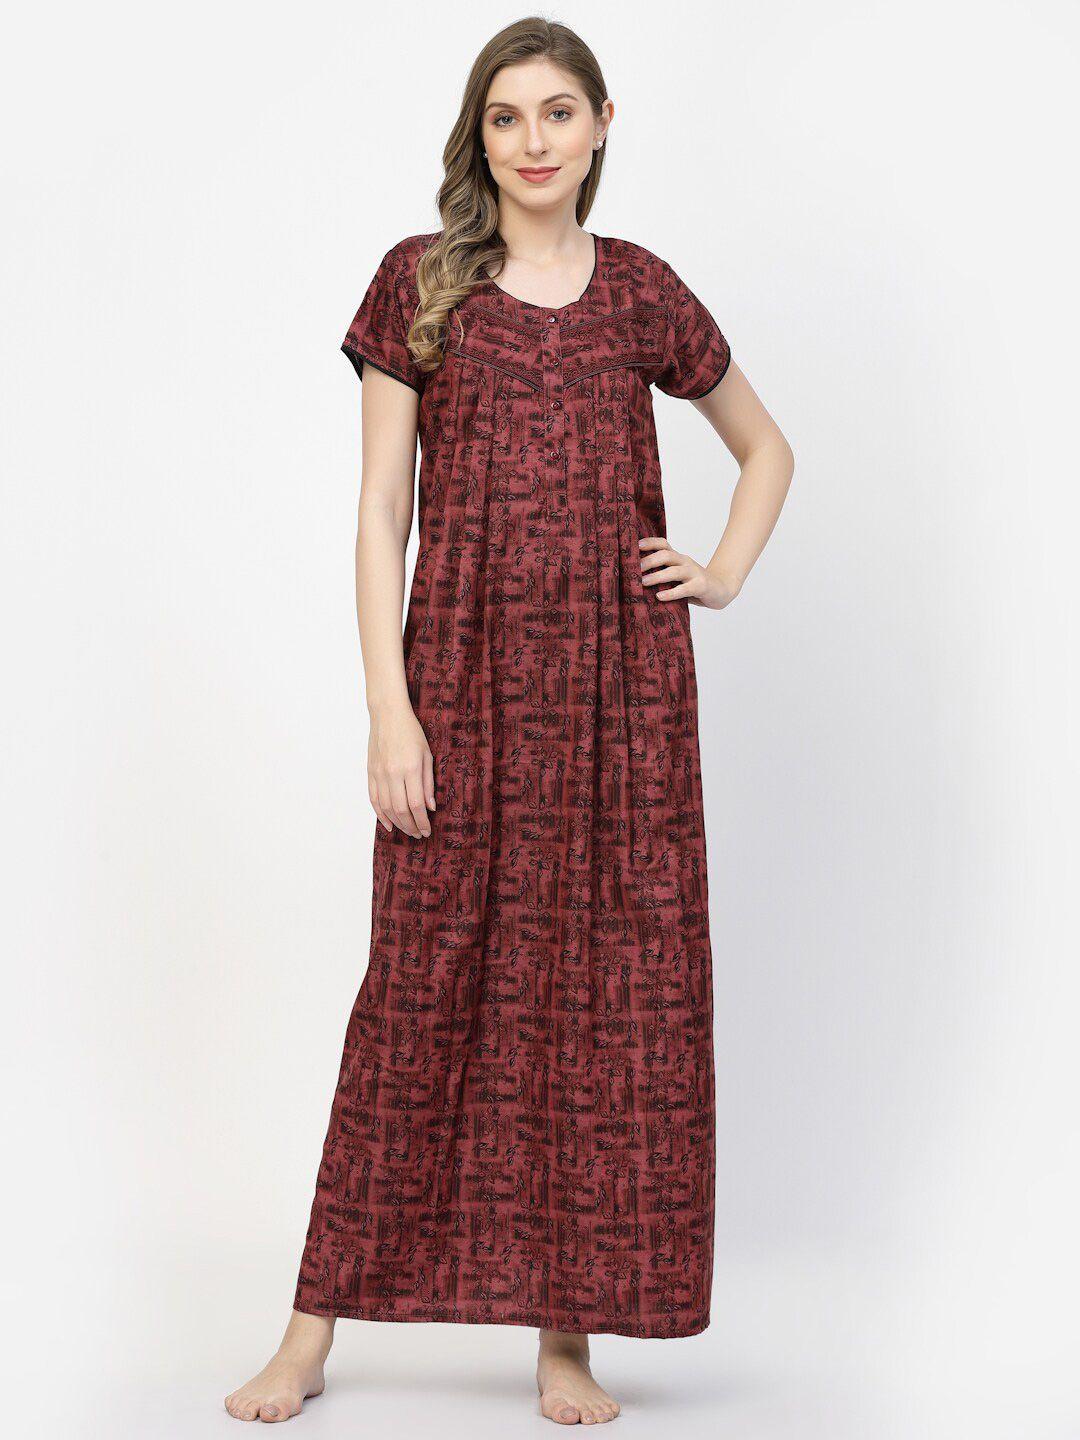 sweet-dreams-maroon-floral-printed-pure-cotton-maxi-nightdress